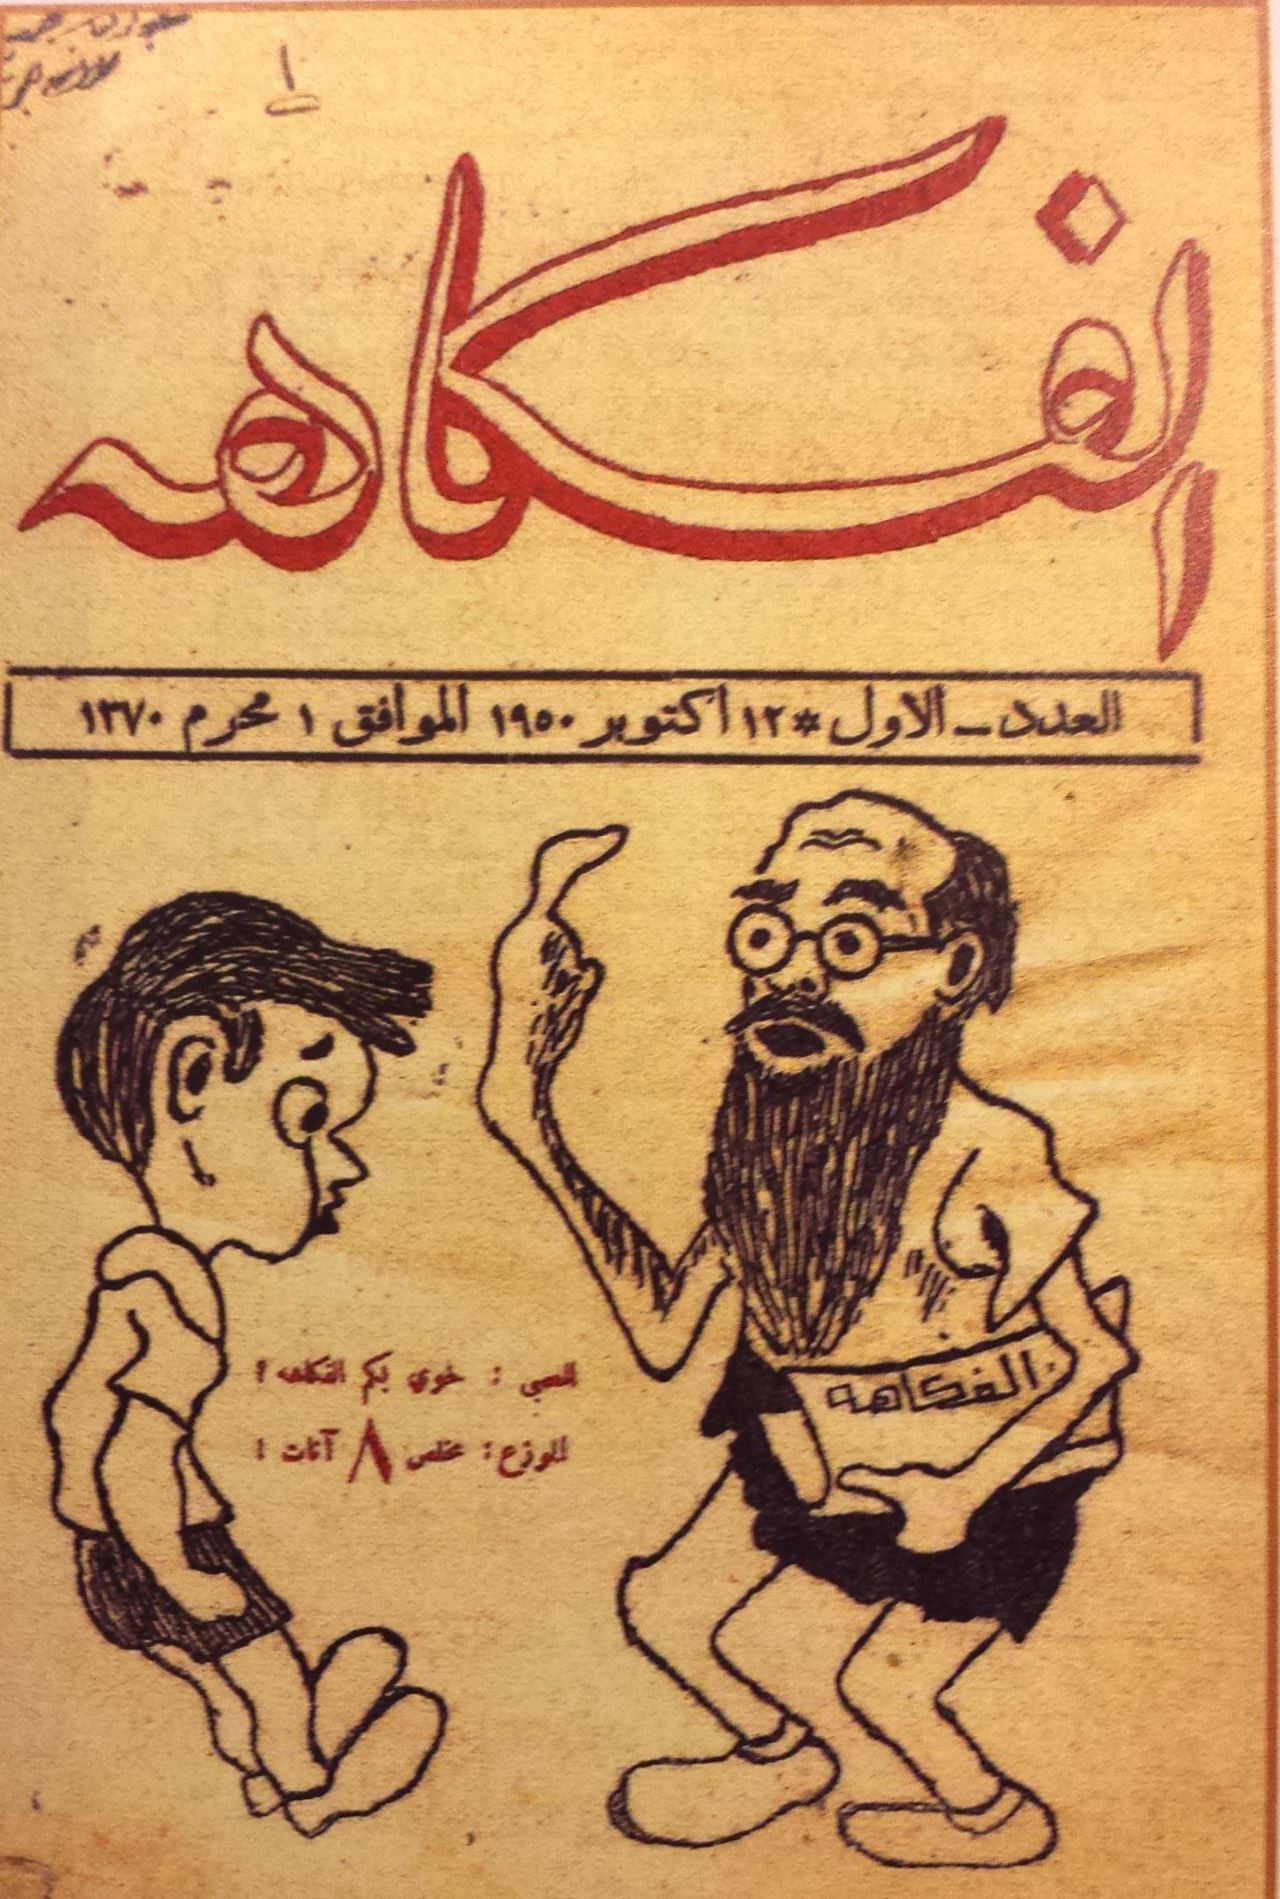 Comedy in Kuwait back in the fifties